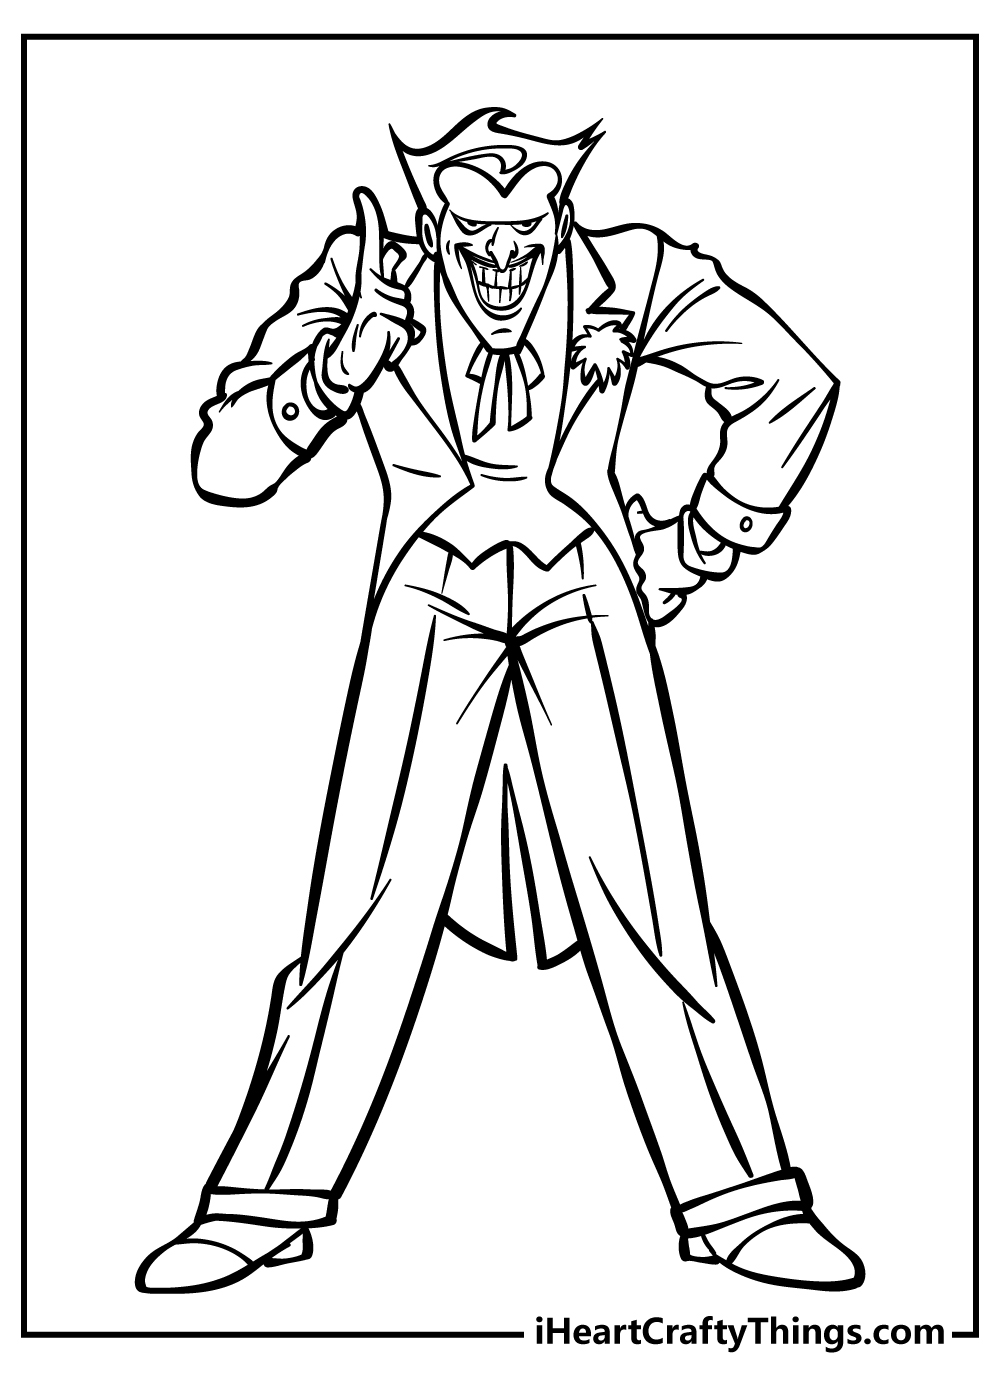 Printable Joker Coloring Pages Updated 20